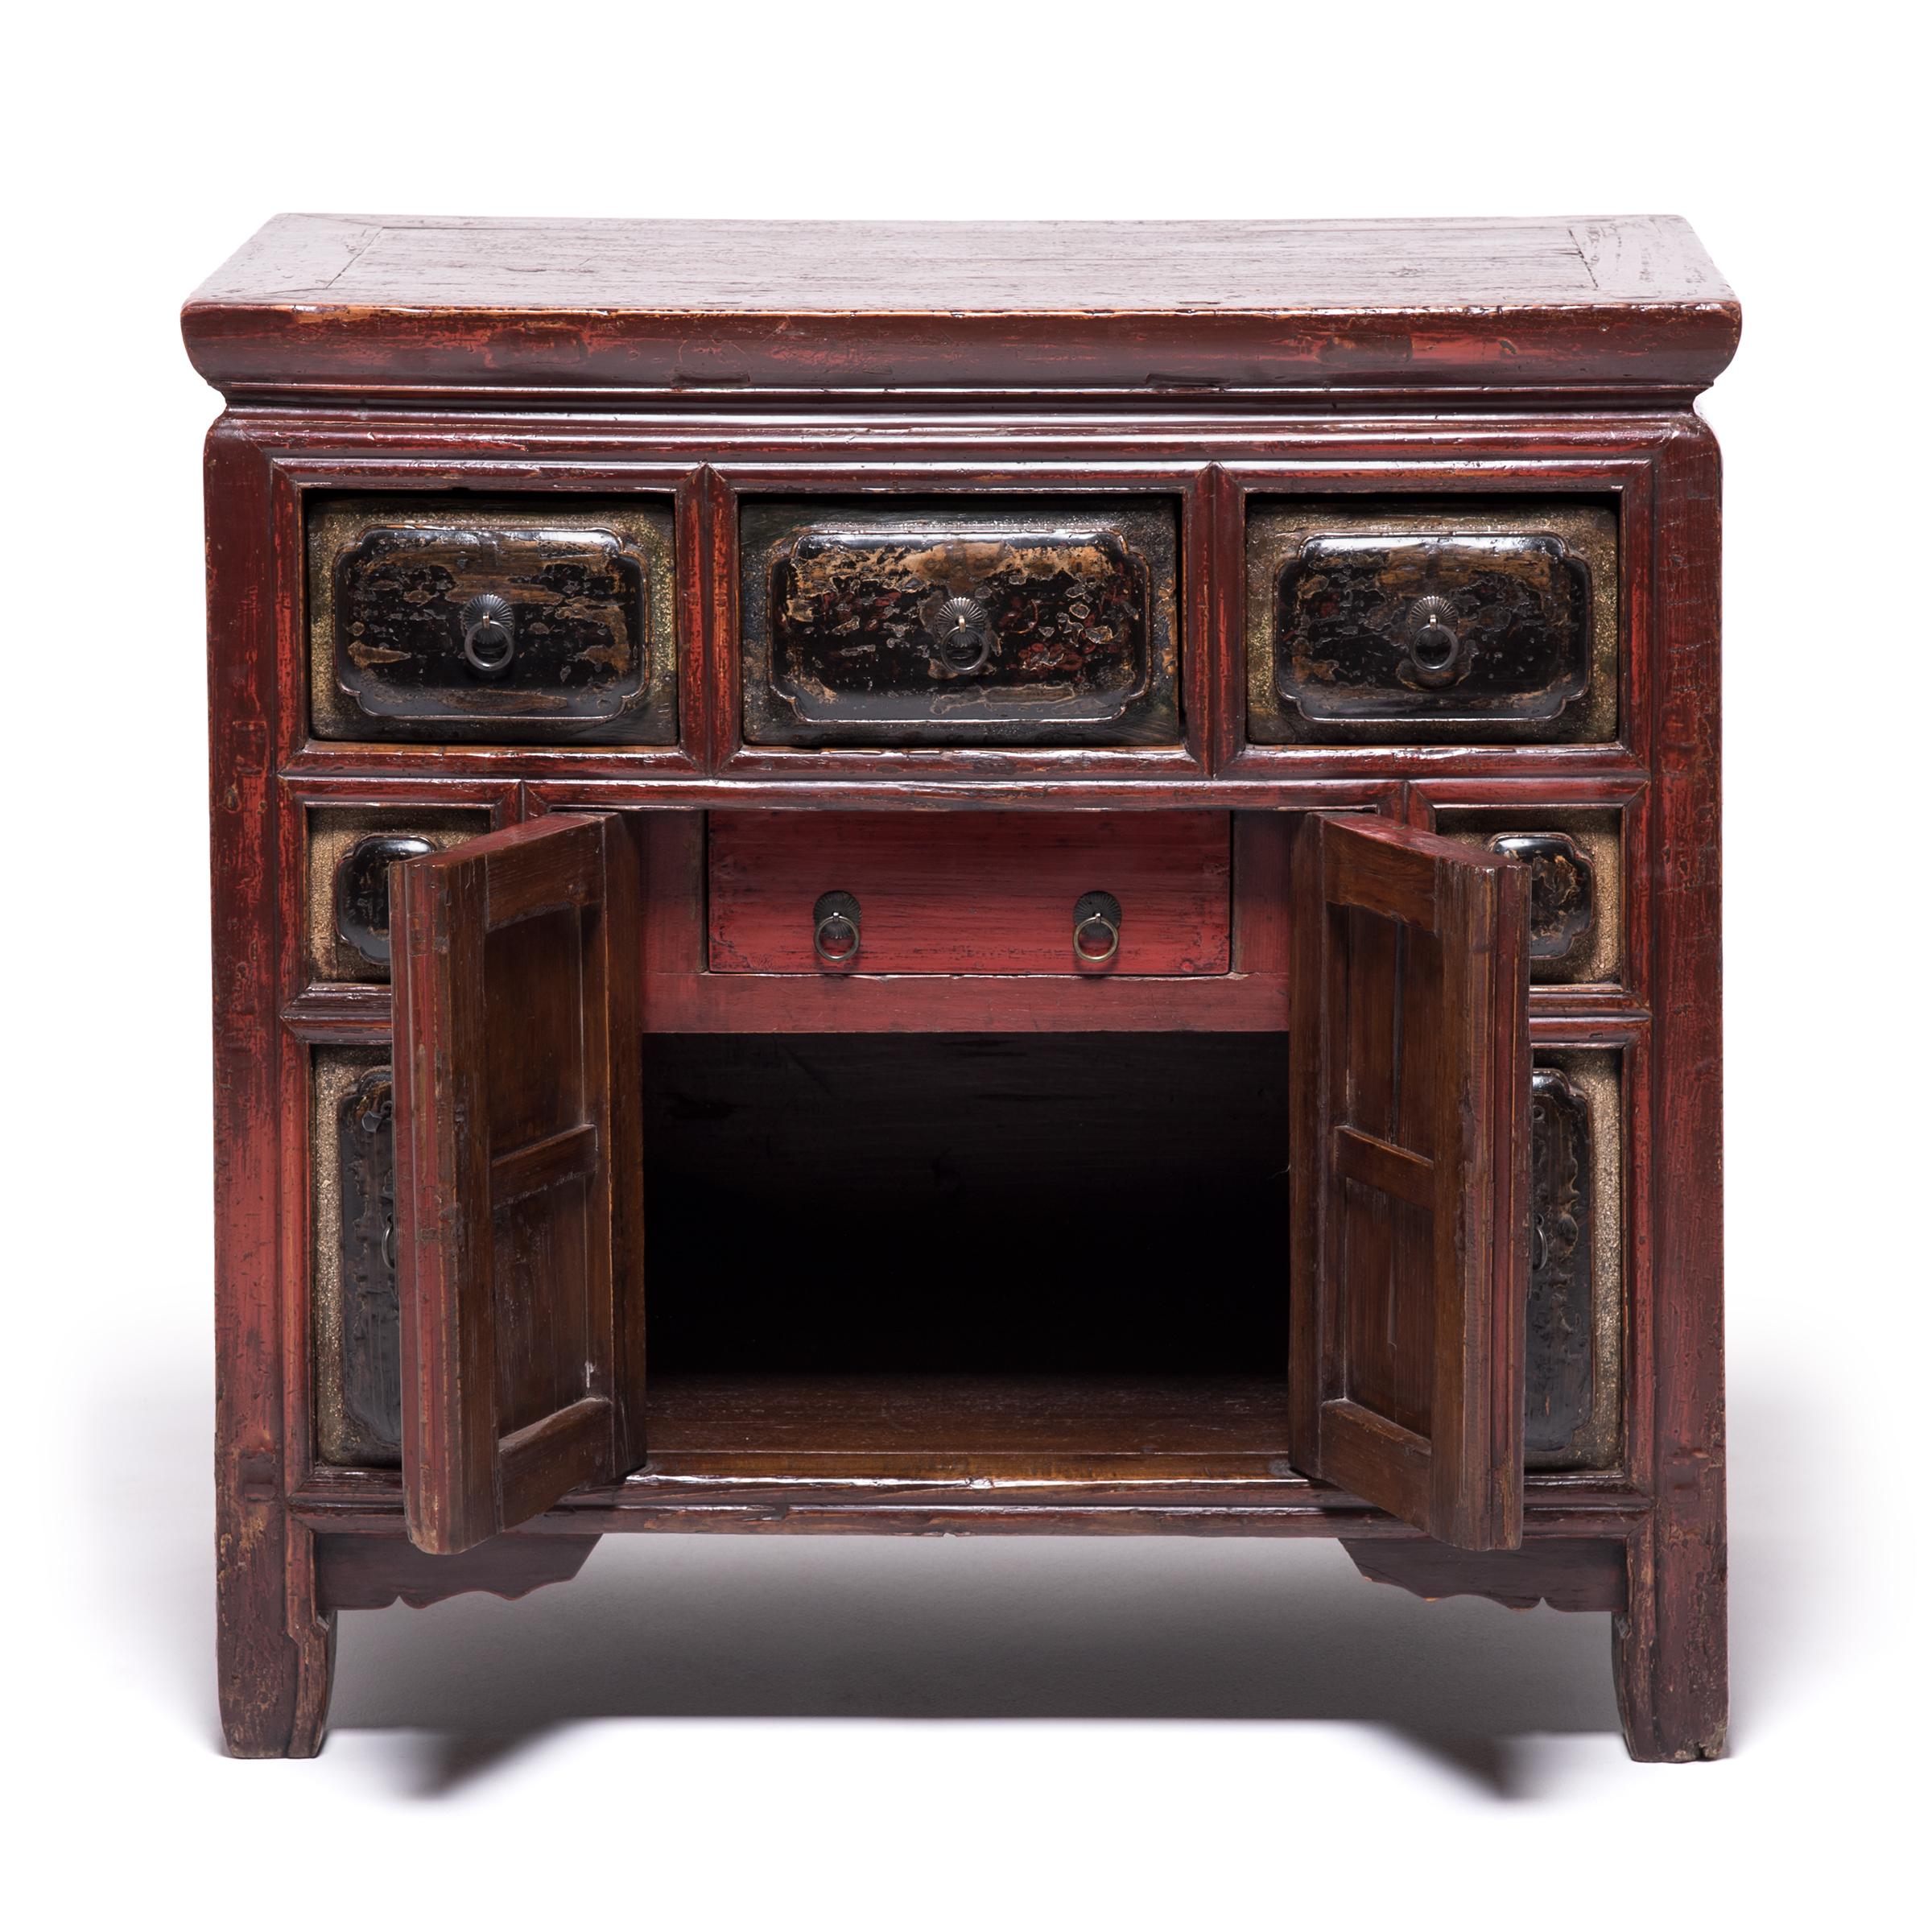 Carpenters in China's Fujian province during the late Qing dynasty frequently experimented with new carving techniques and ornate finishes. A collection of varying techniques, this provincial red-lacquered storage chest features cushion carved